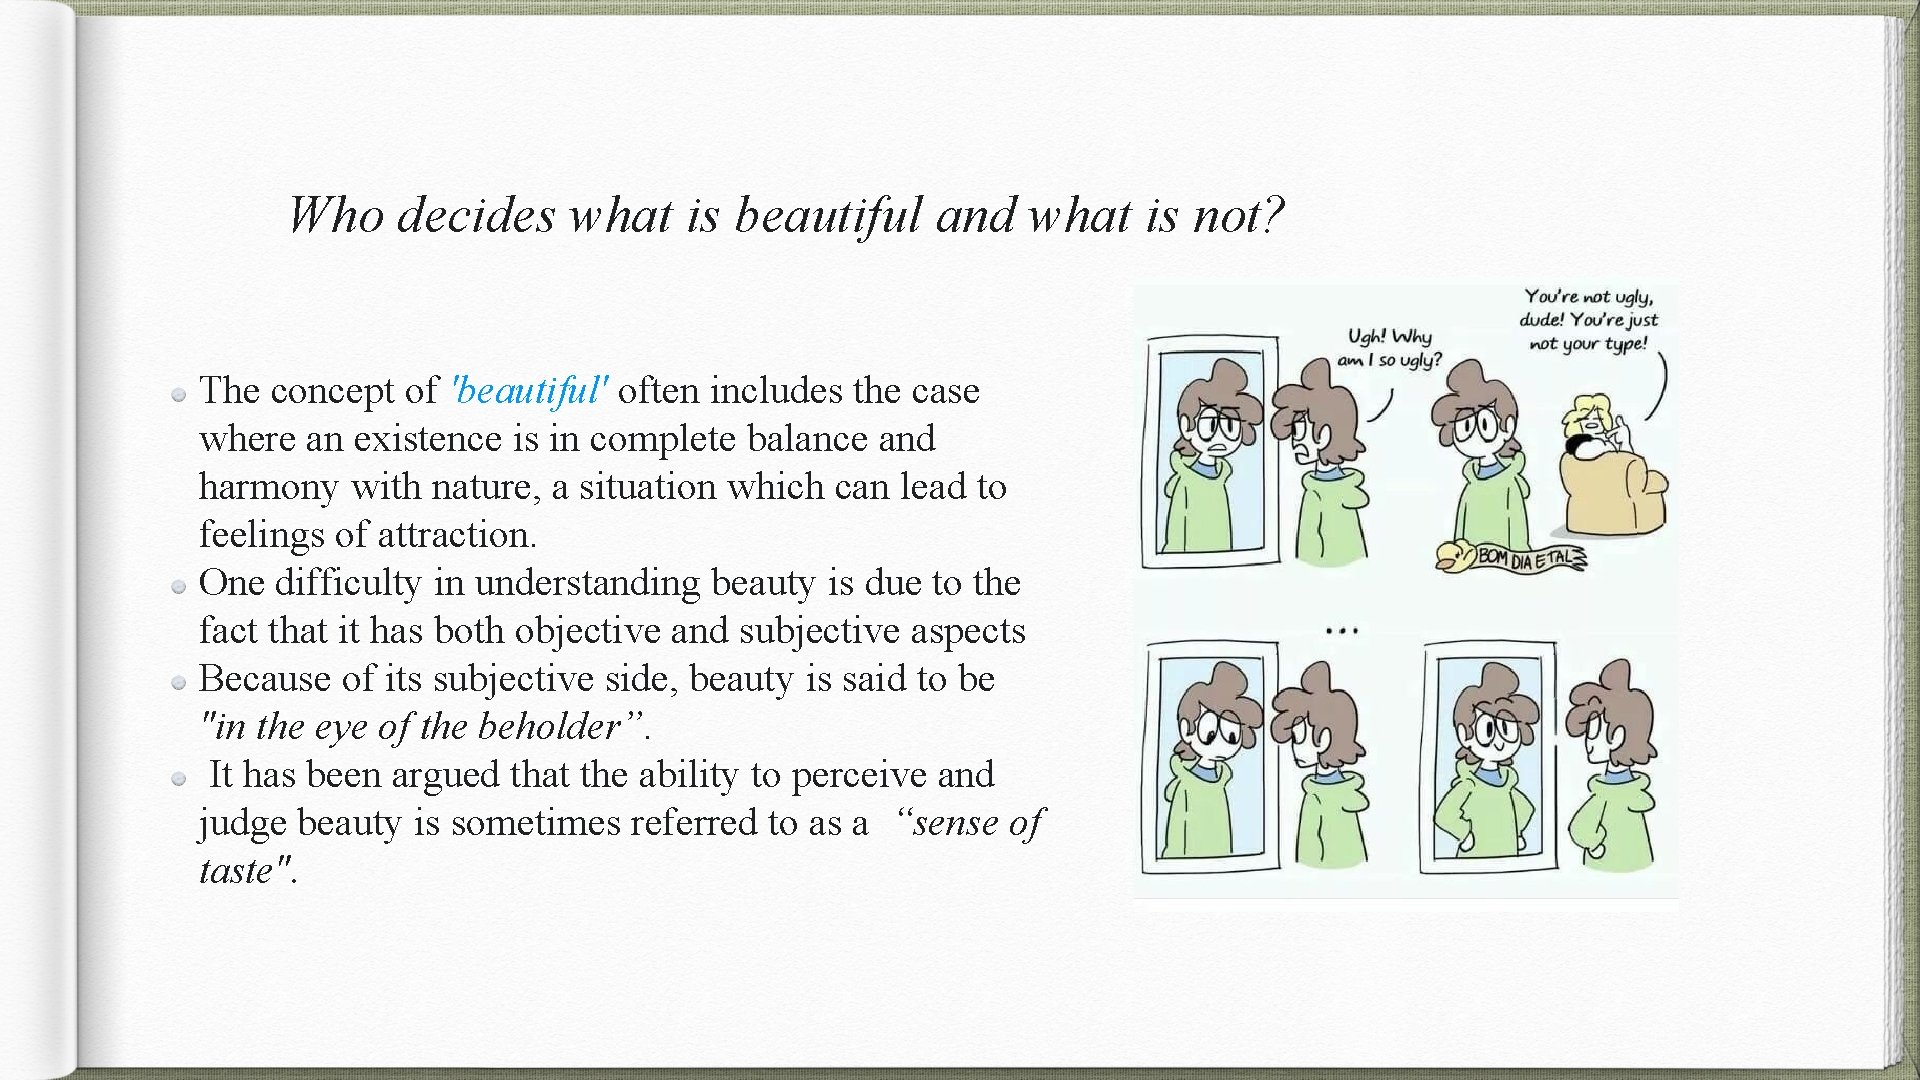 Who decides what is beautiful and what is not? The concept of 'beautiful' often